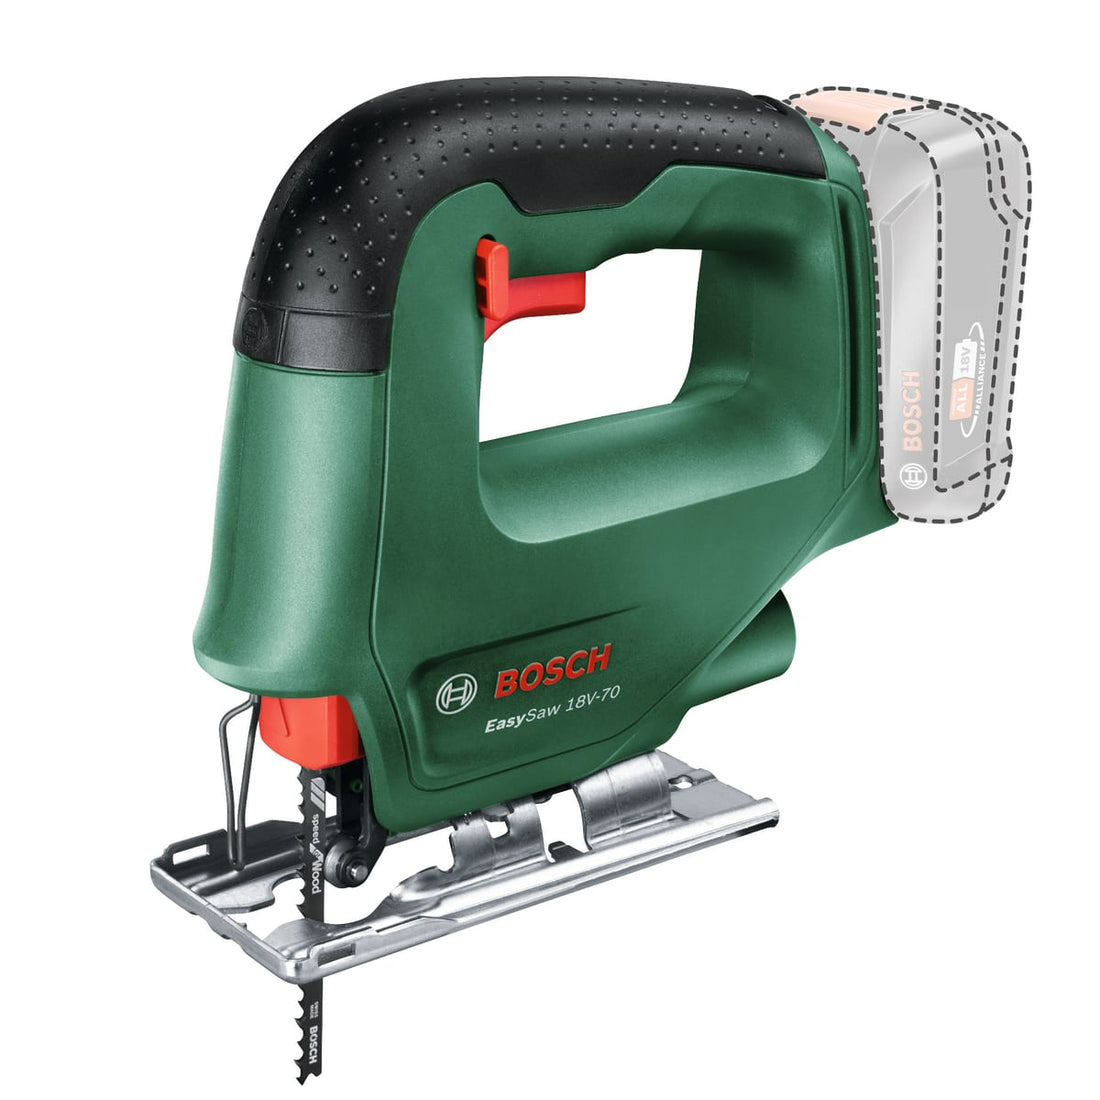 BOSCH EASY SAW 18V-70 JIGSAW, WITHOUT BATTERY AND CHARGER